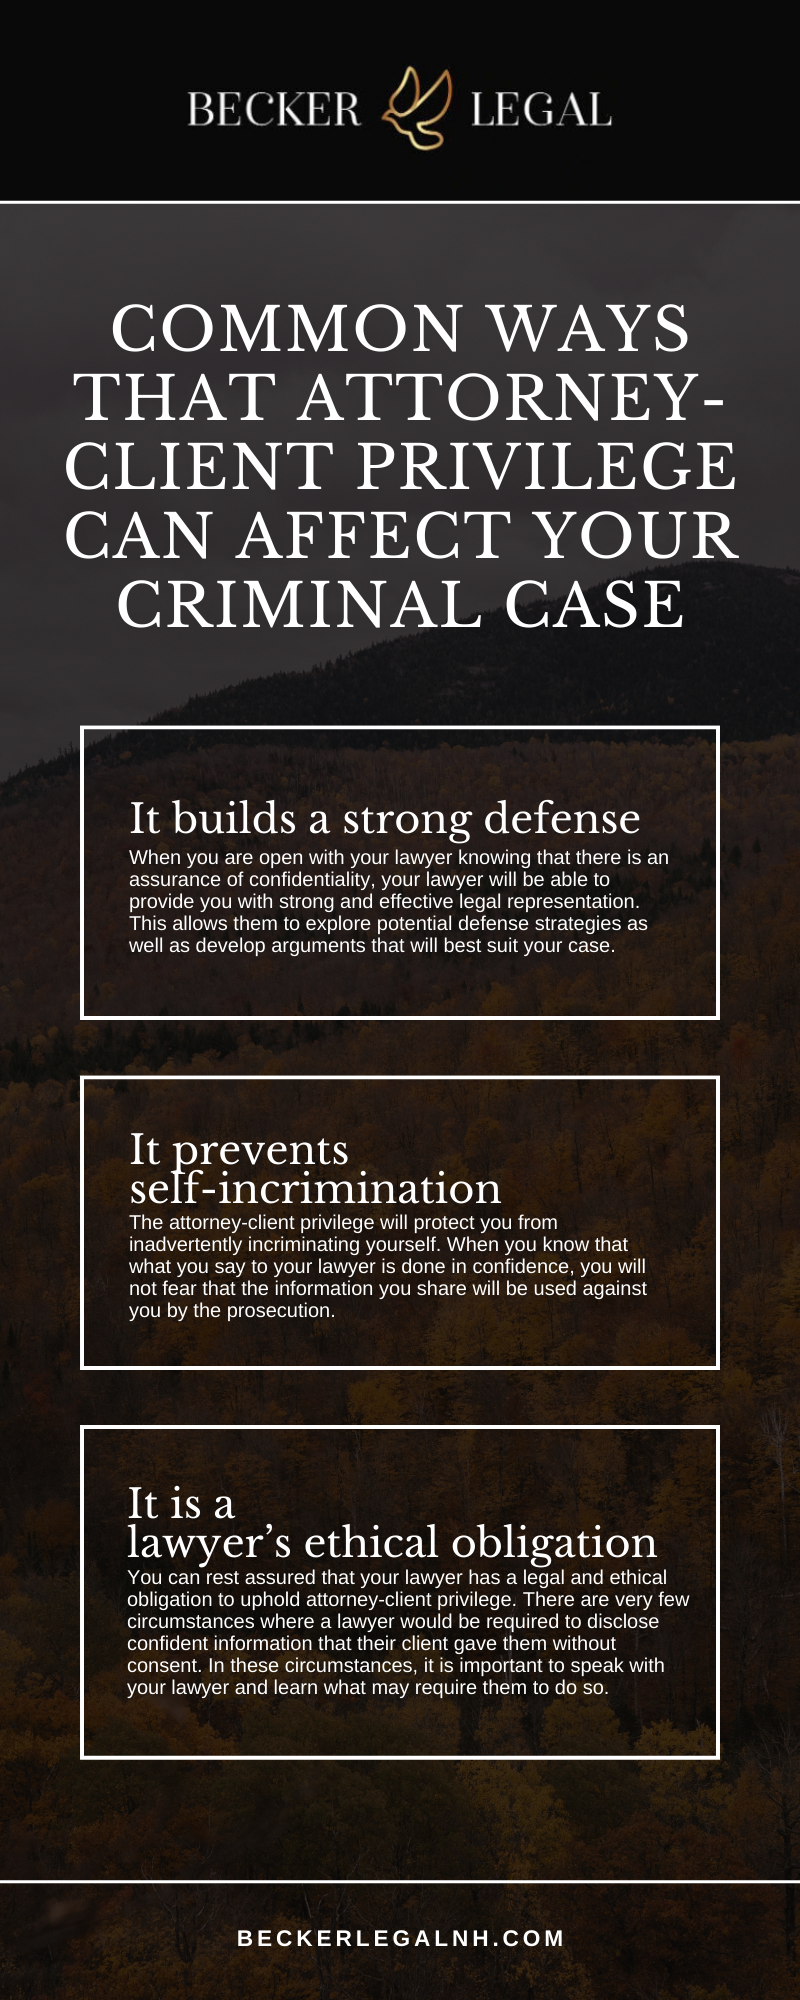 Common Ways That Attorney-Client Privilege Can Affect Your Criminal Case Infographic